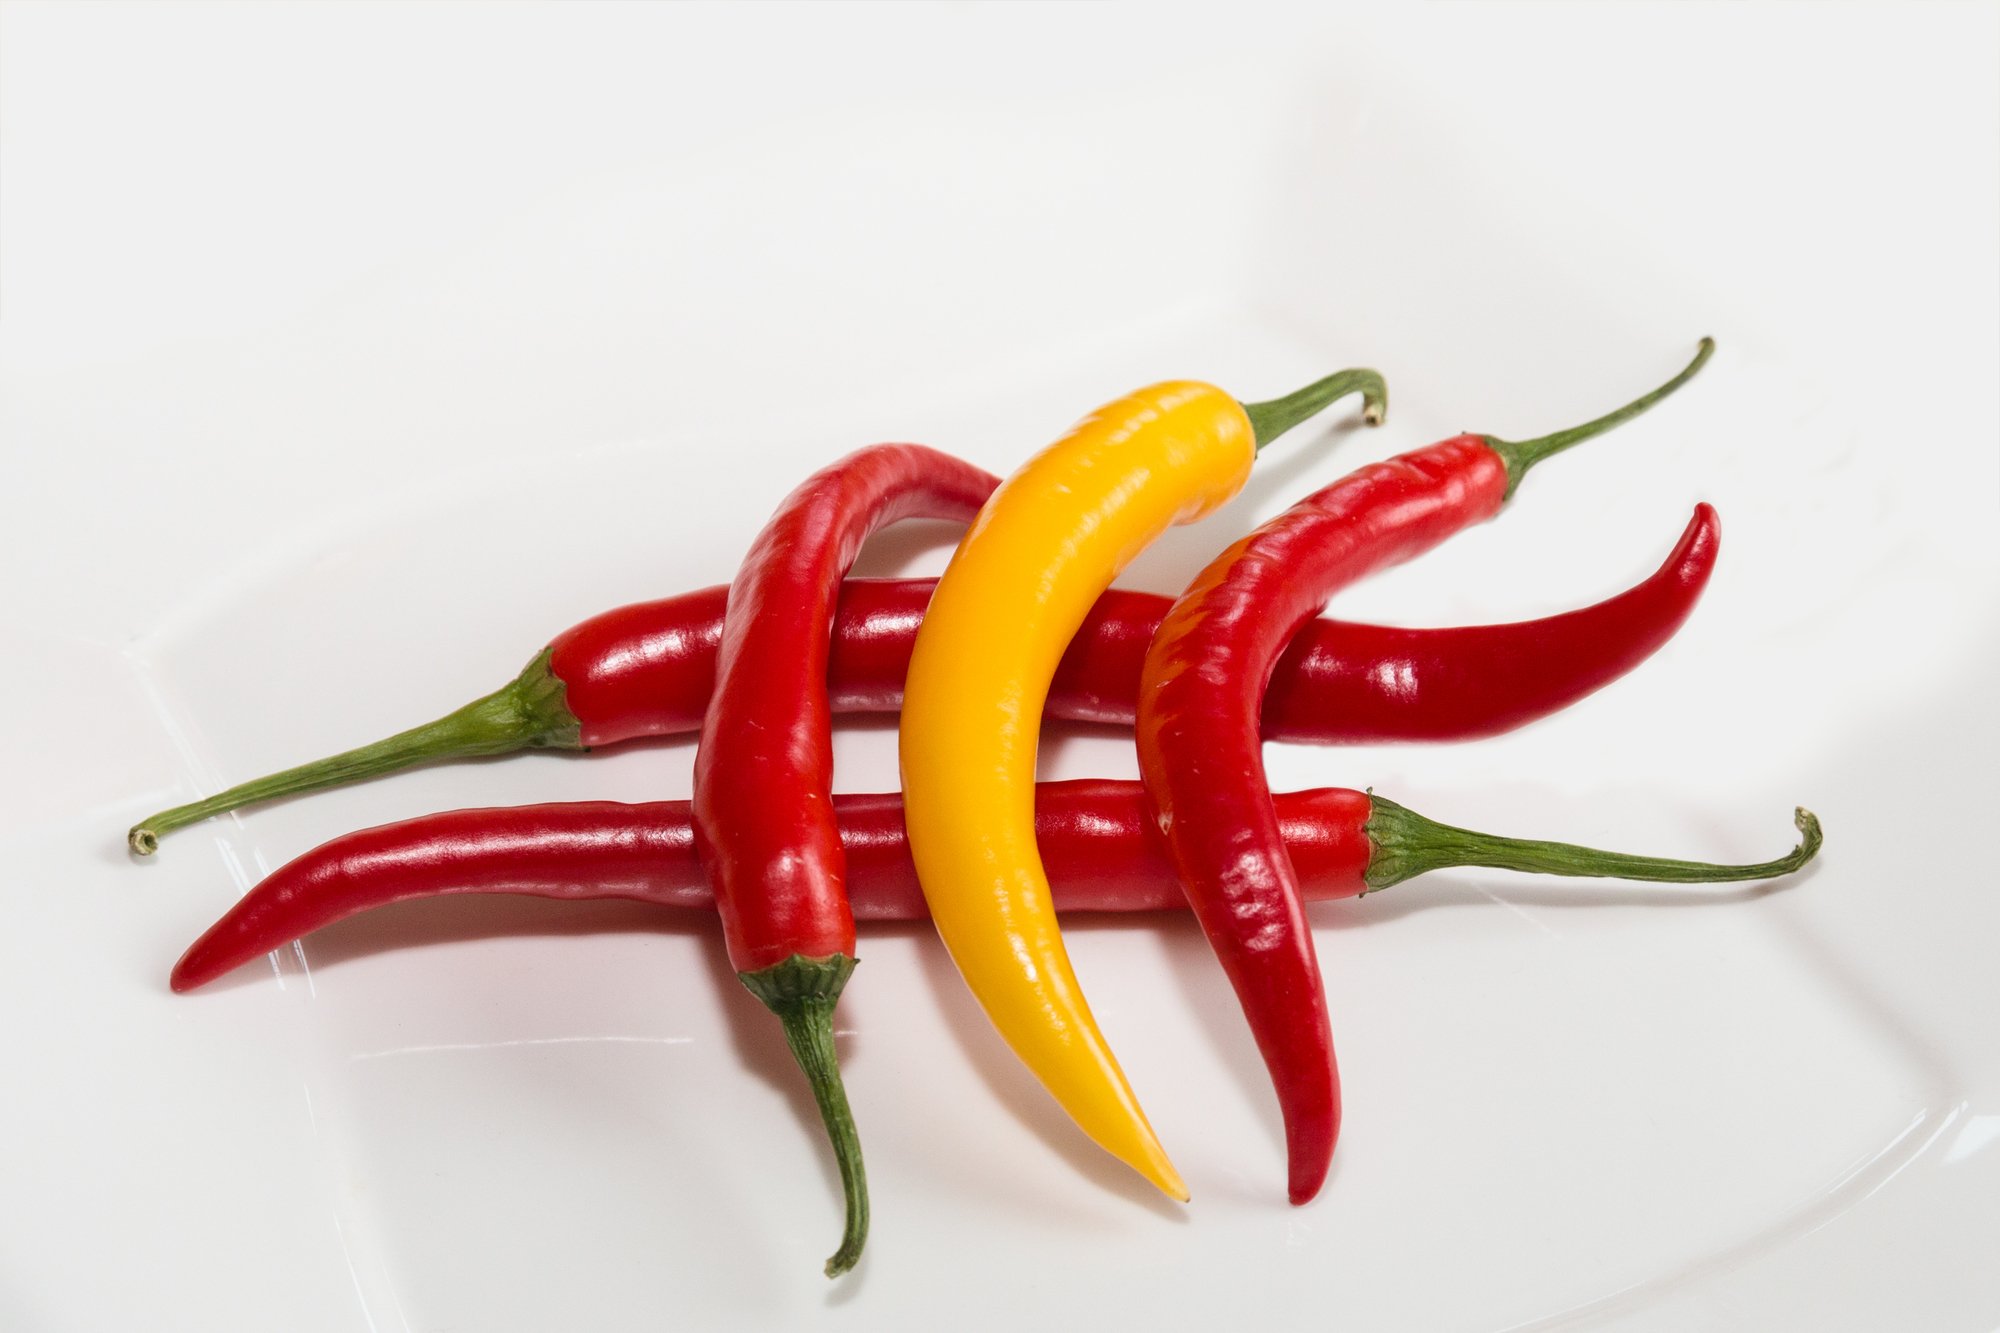 5 Spicy Food Facts You Should Know - STEMJobs